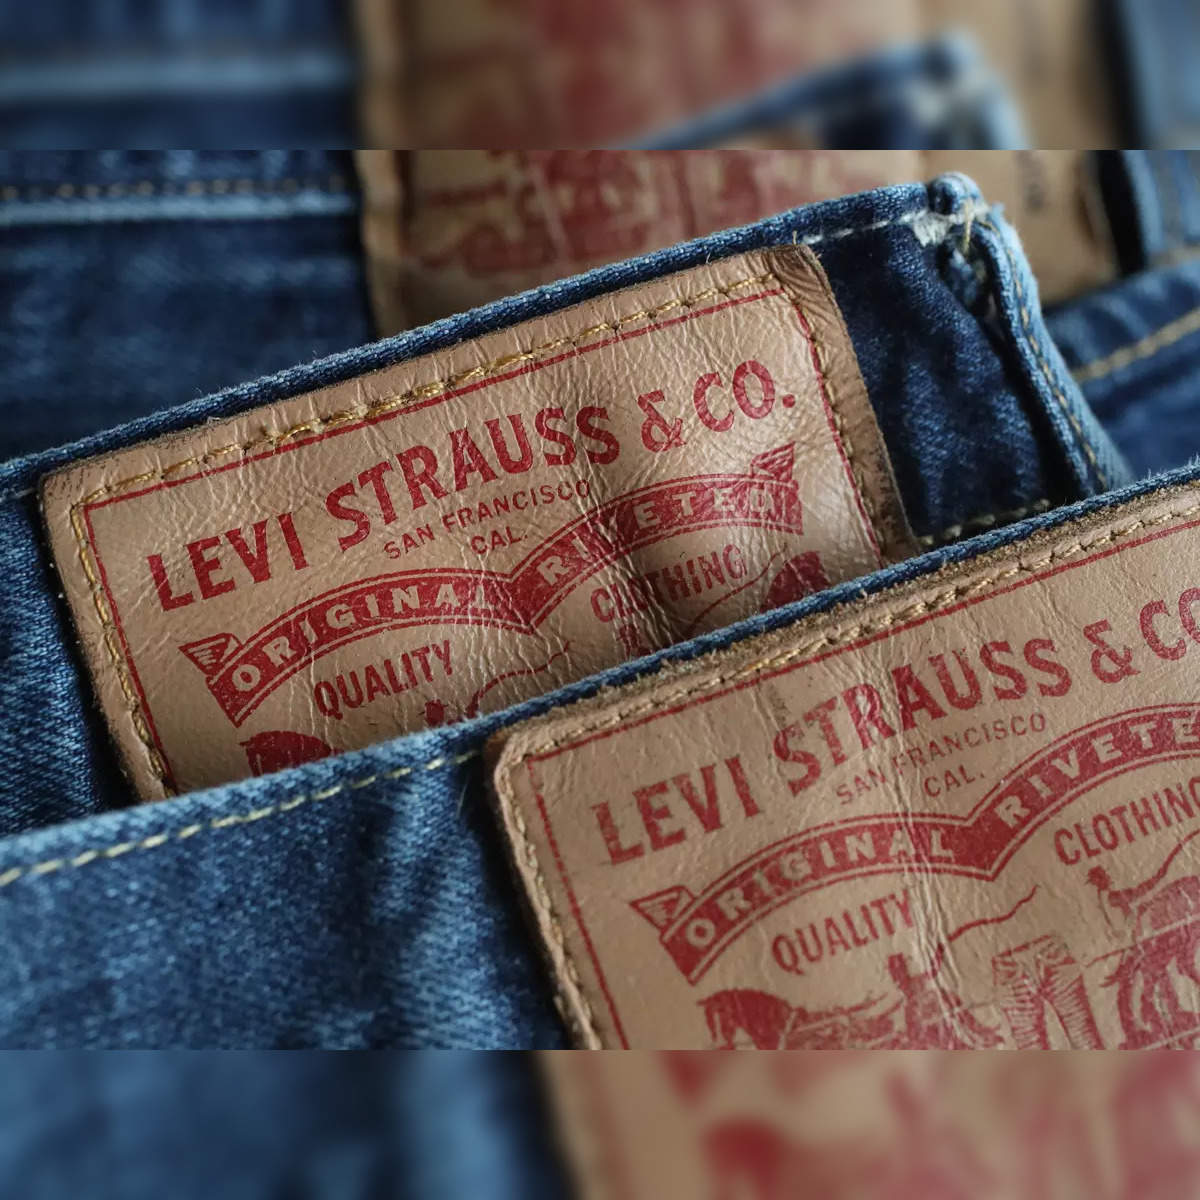 Men's Signature by Levi Strauss & Co. Relaxed Fit Jeans size 36 x 34 | eBay